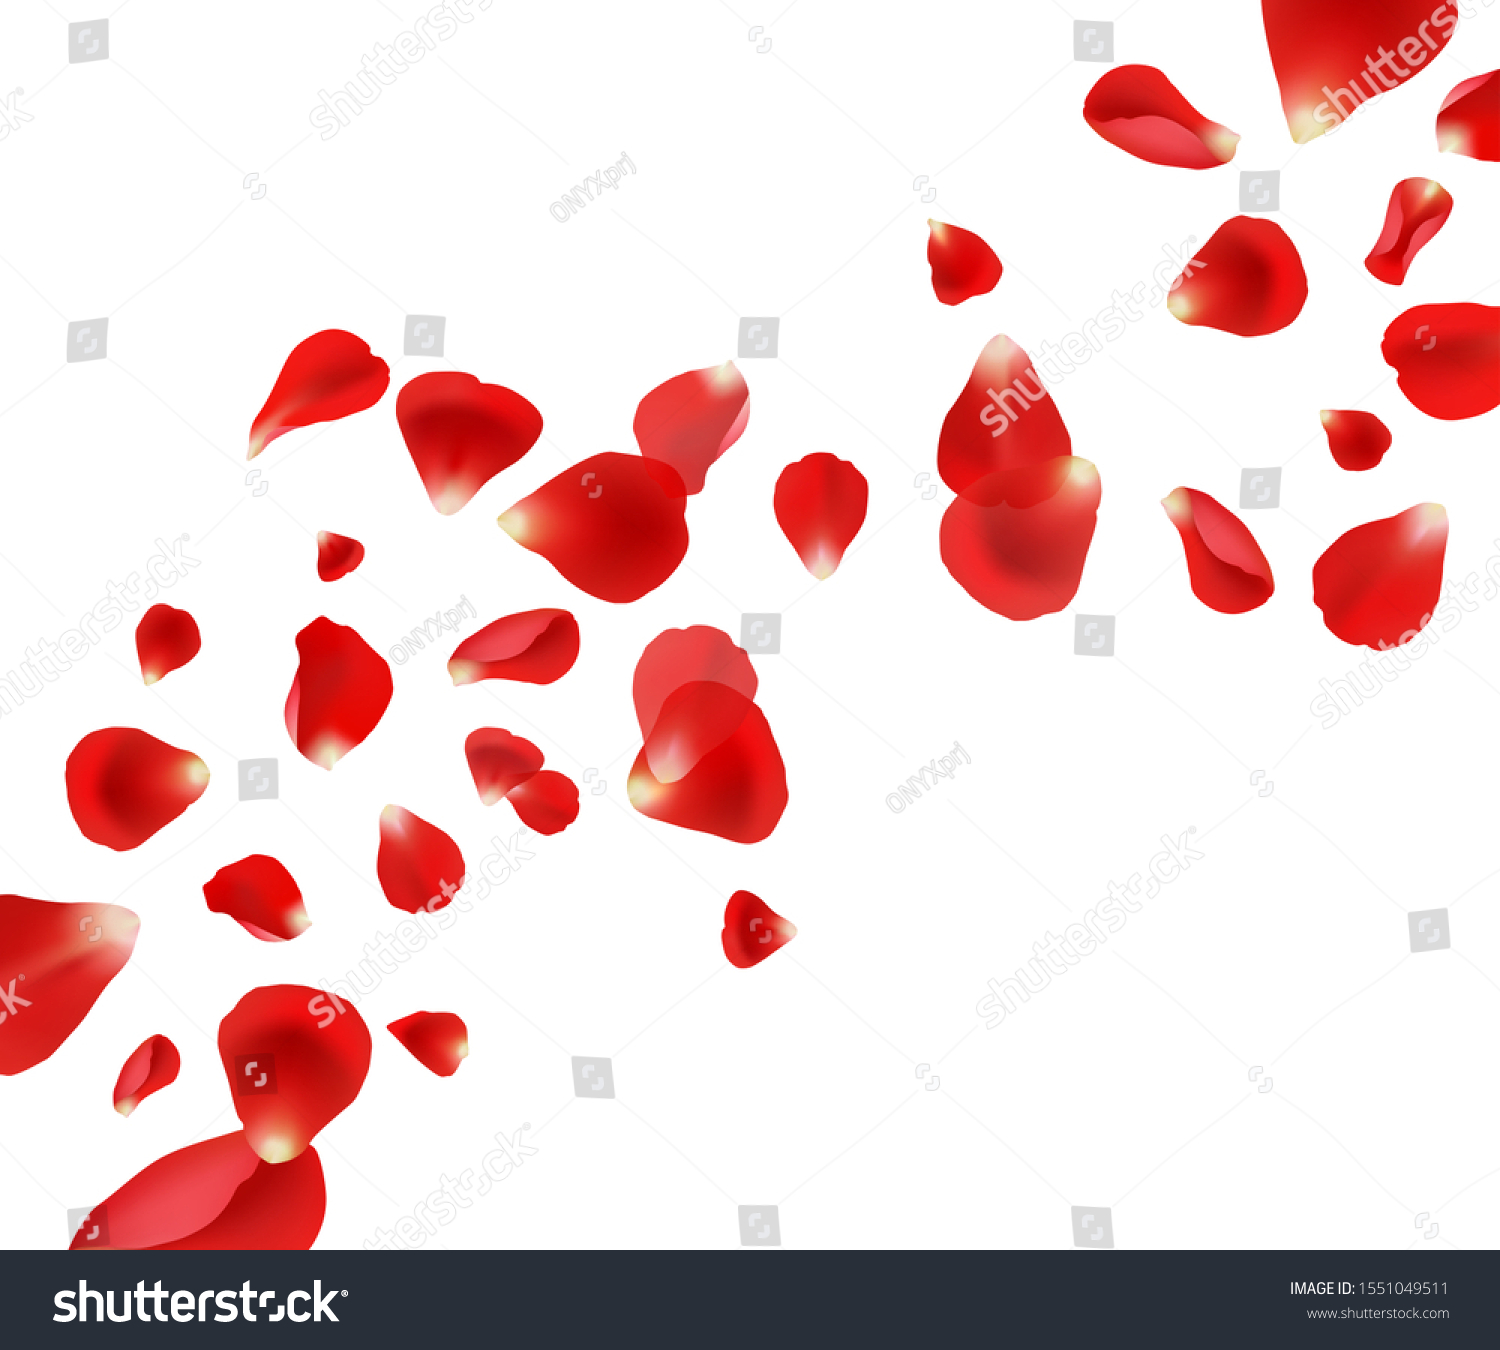 Petal background. Flying rose petals wedding beautiful template design for cards invitation vector pictures #1551049511